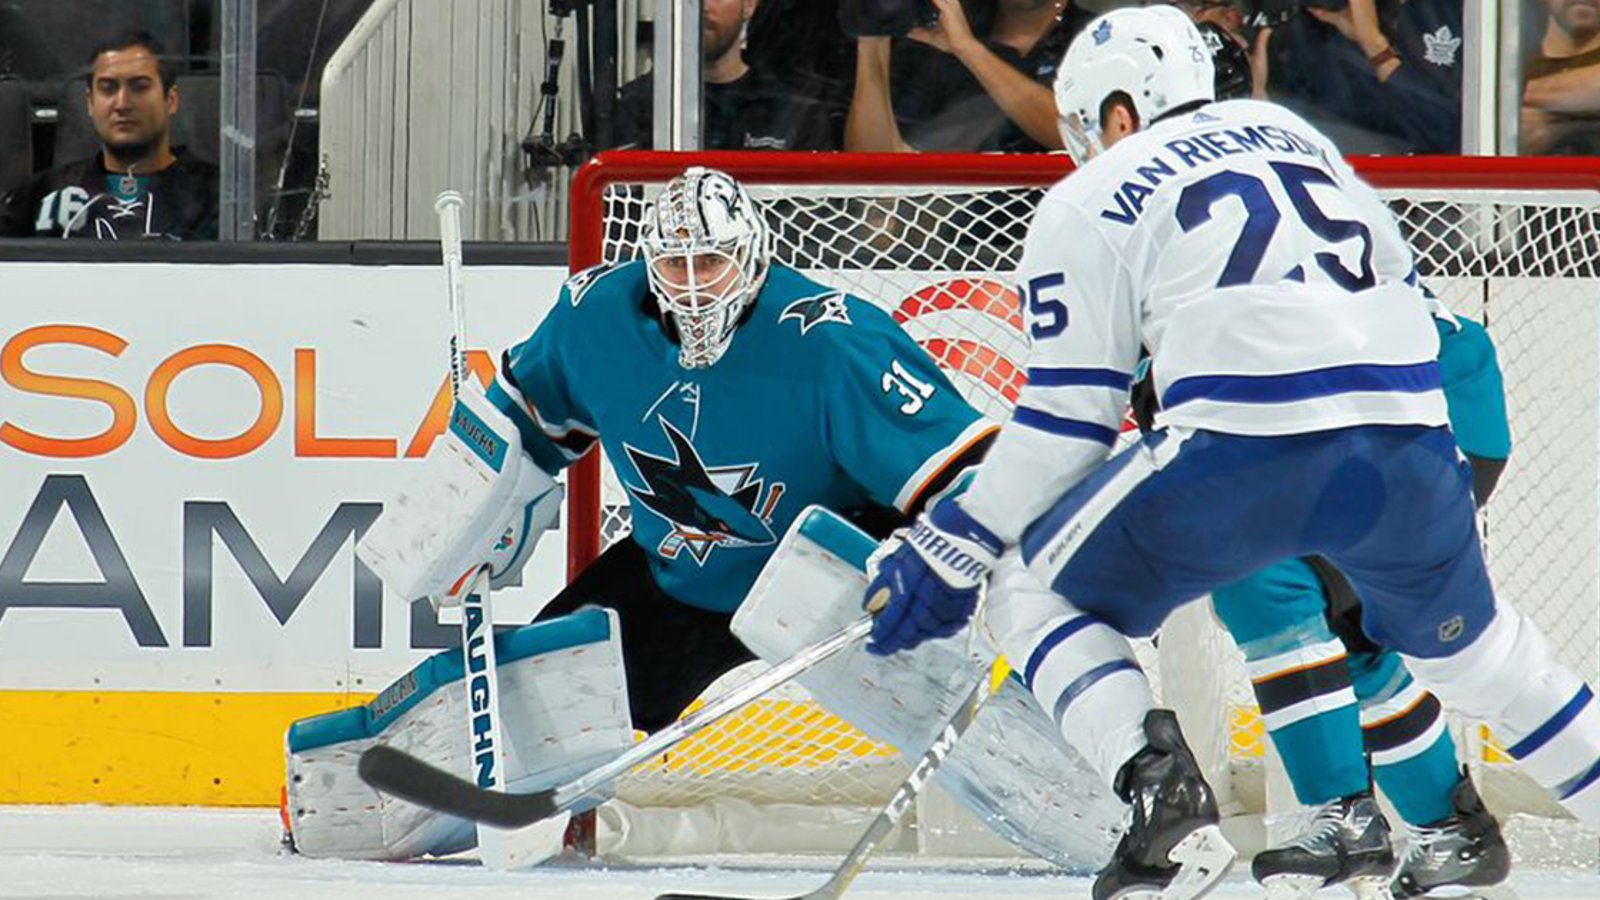 Game Preview: Leafs vs Sharks